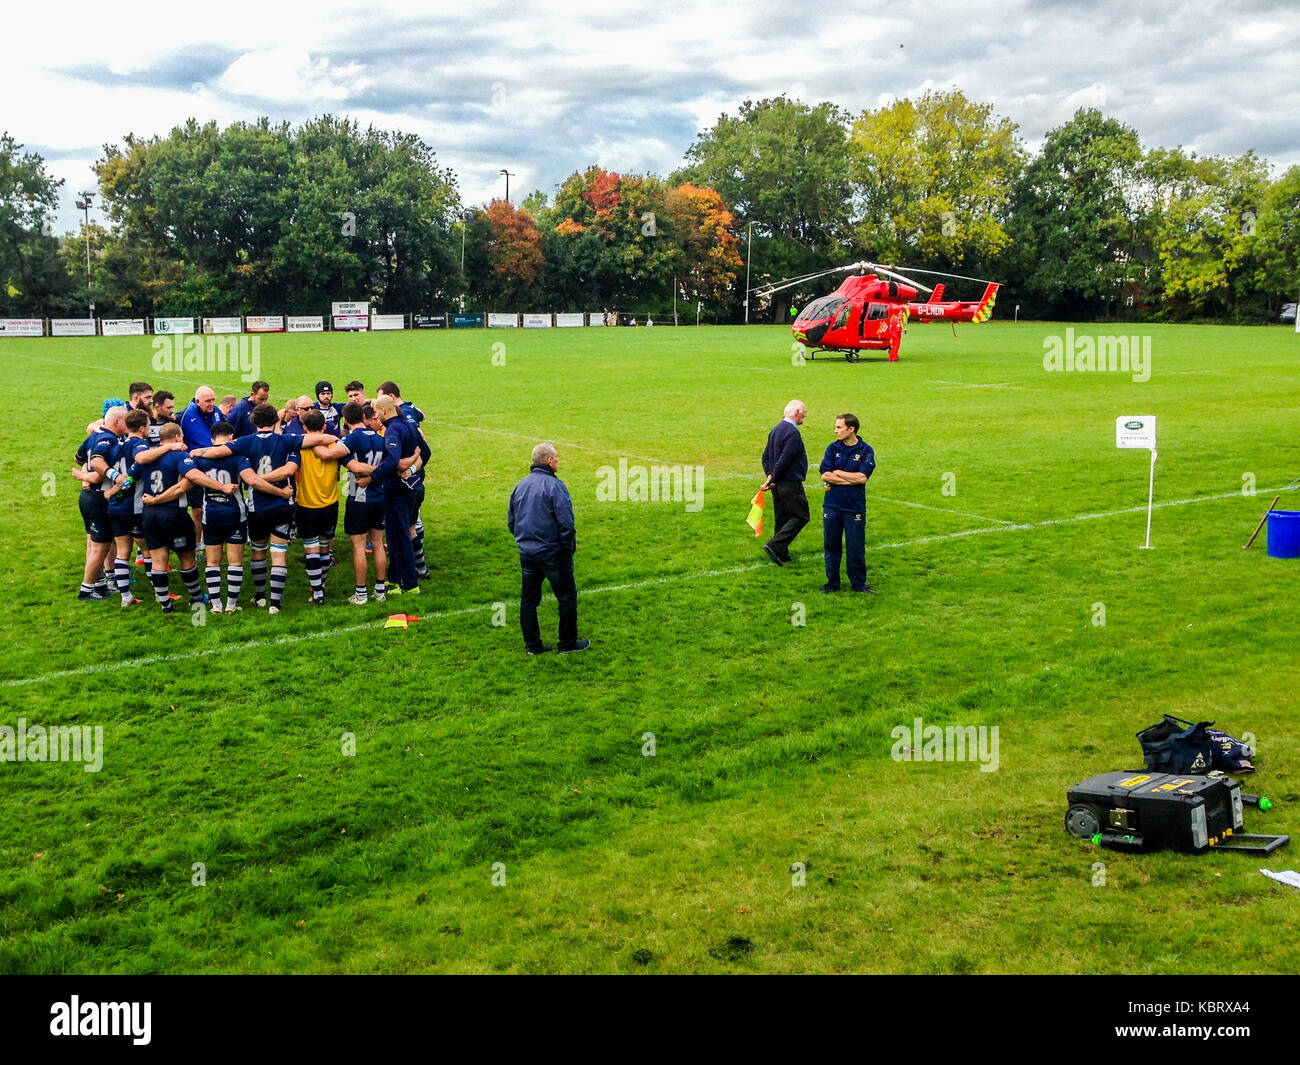 Woodford Green, London, UK. 30th September 2017. Players confer as London’s  Air Ambulance helicopter G-LNDN lands at Woodford Rugby Football Club's Highams ground in Woodford Green in response to a report of a spectator suffering a heart attack. The Woodford v Chelmsford match was suspended for 40 minutes whilst paramedics attended to the casualty who was able to leave by road.  Woodford went on to win the match. The Air Ambulance is supported by London Freemasons.  Credit: Mark Dunn/ Alamy Live News Stock Photo